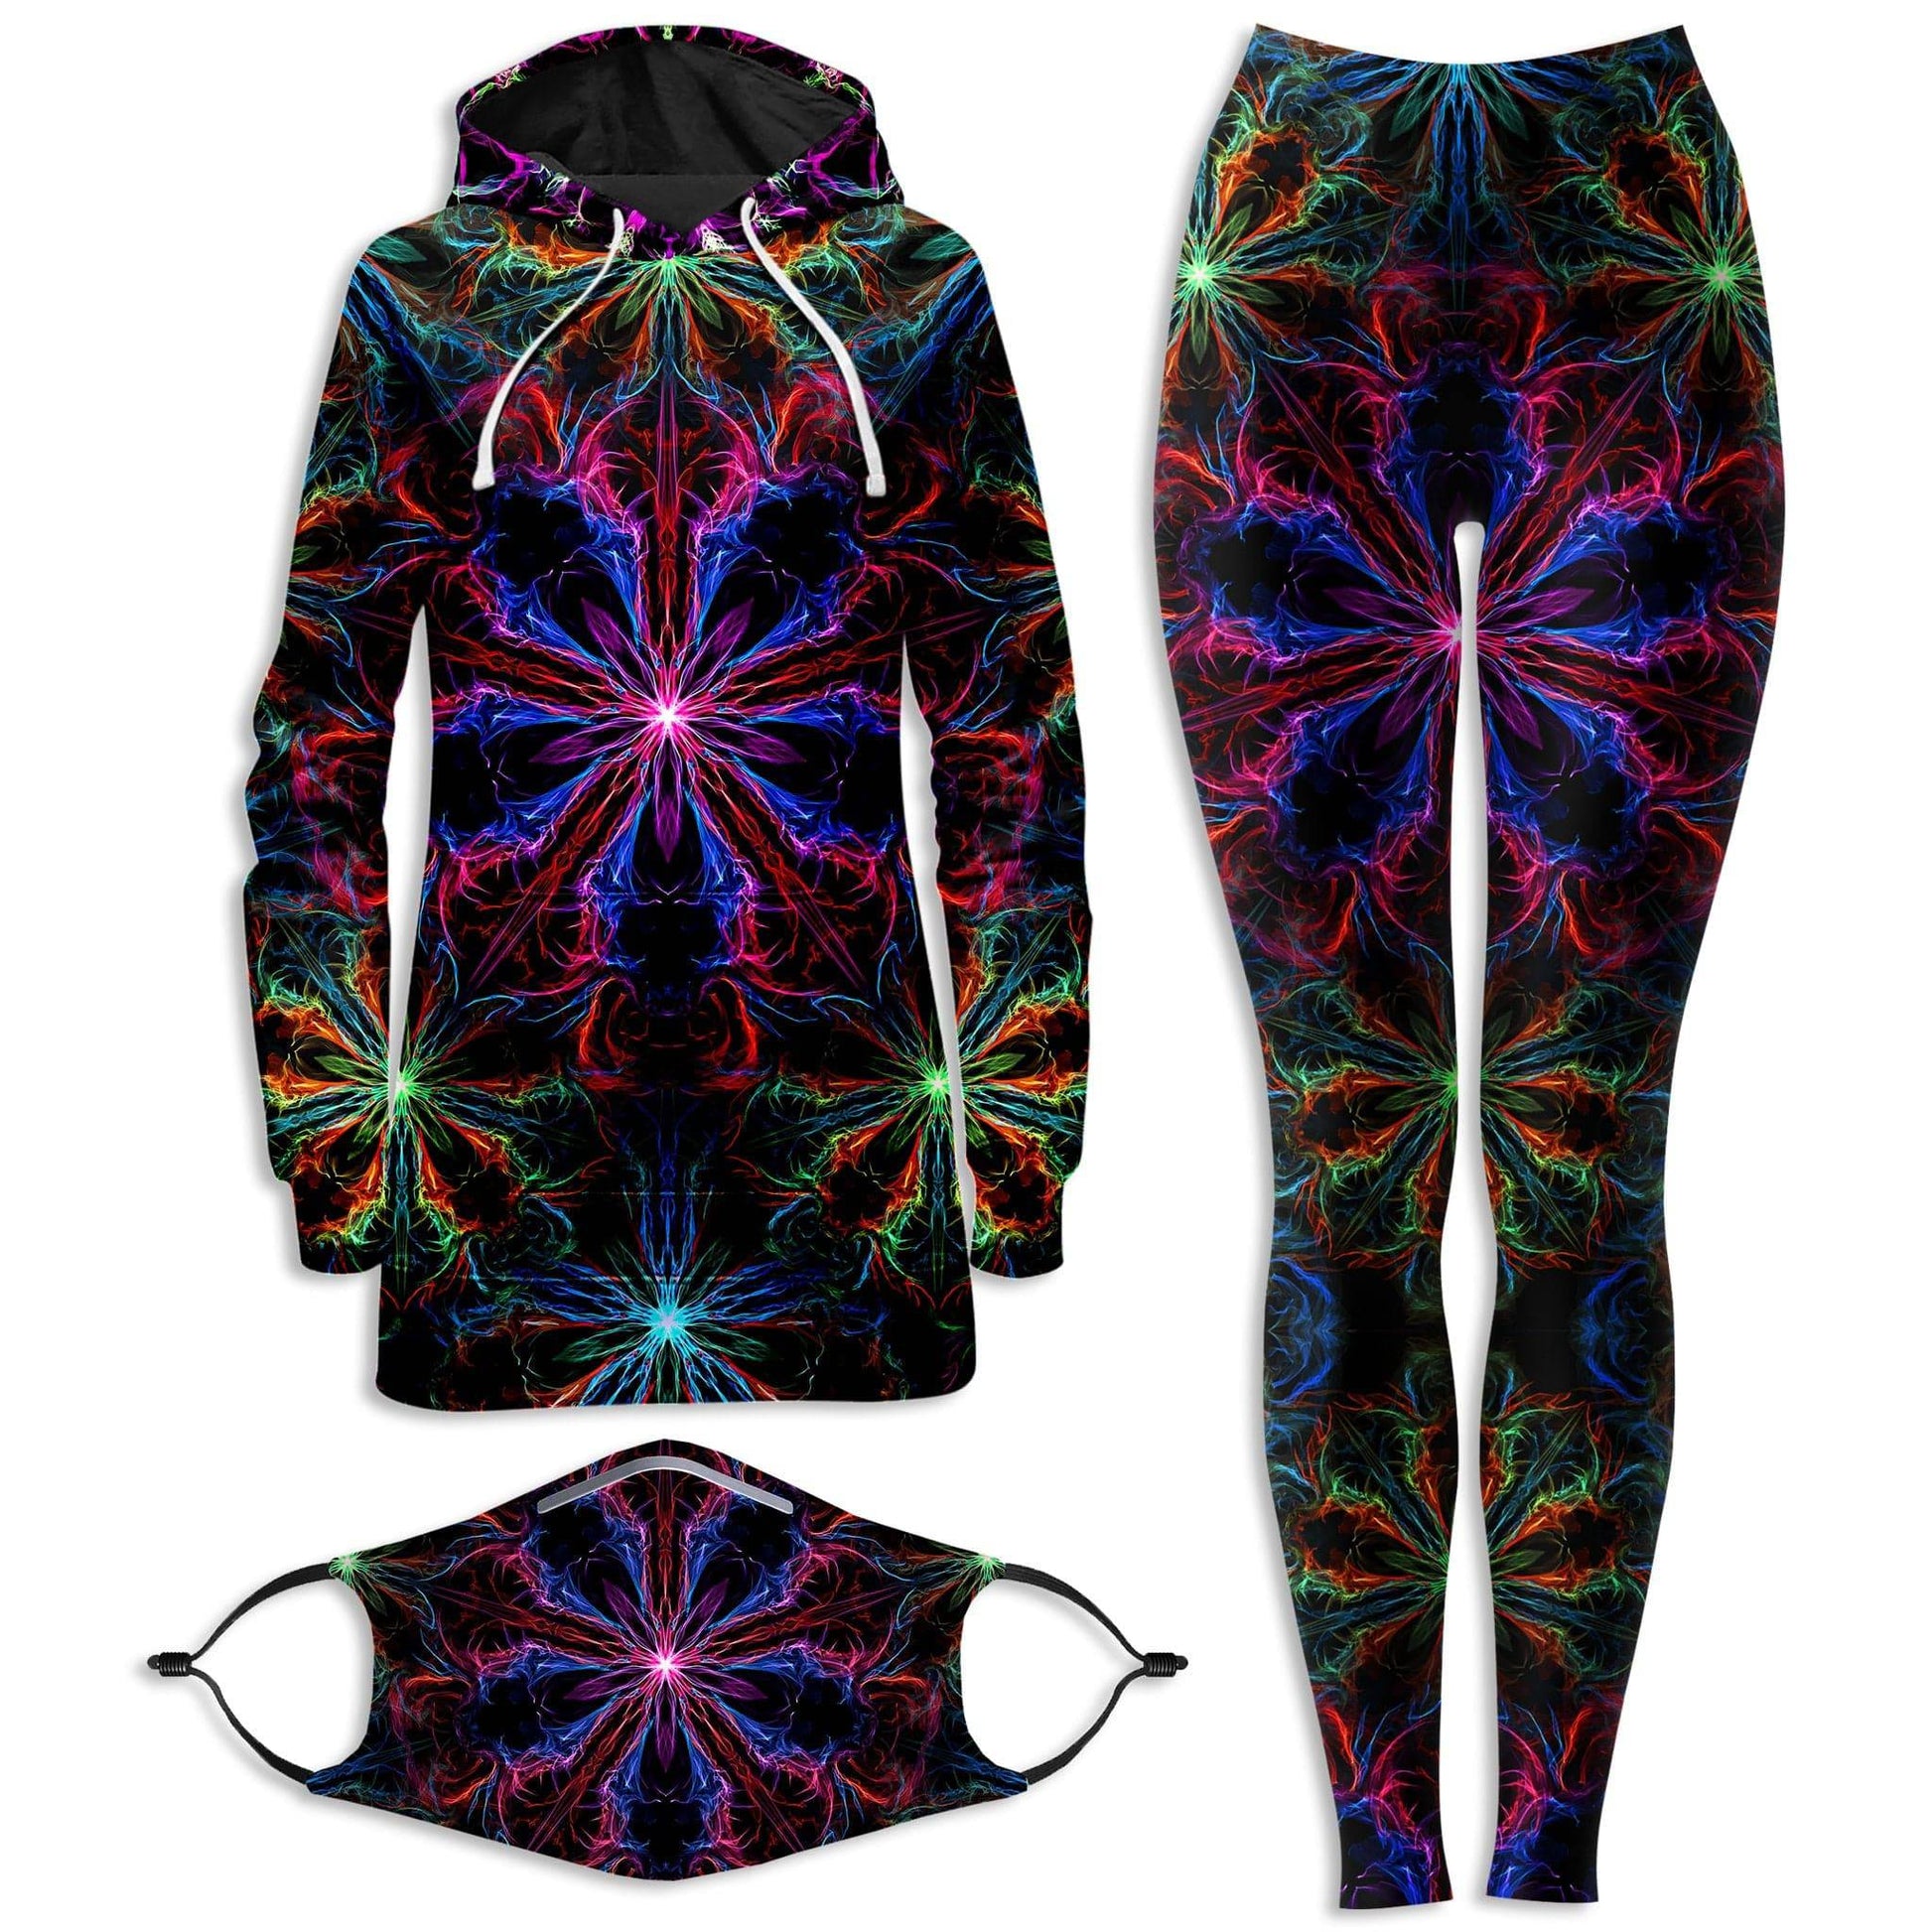 Man Trip Hoodie Dress and Leggings with PM 2.5 Face Mask Combo, Yantrart Design, | iEDM